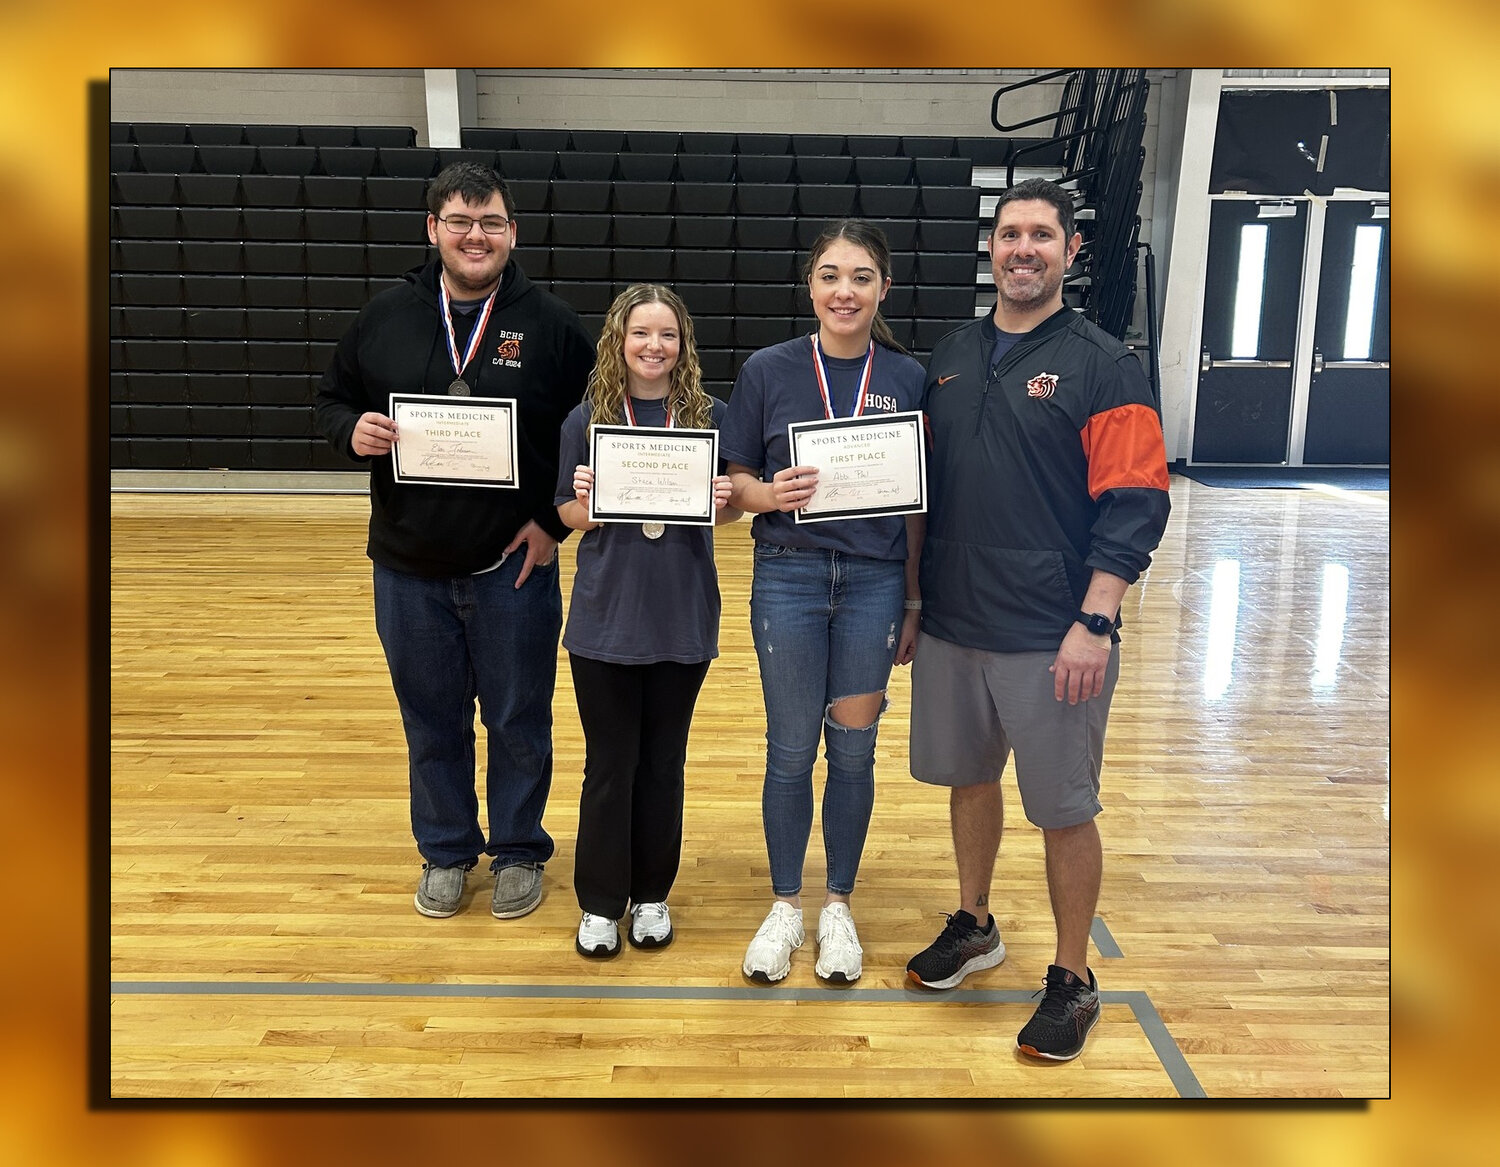 In the Sports Medicine Intermediate/Advanced division, Abbi Paul (1st place), Stacie Wilson (2nd place), and Elias Johnson (3rd place) emerged as victors.